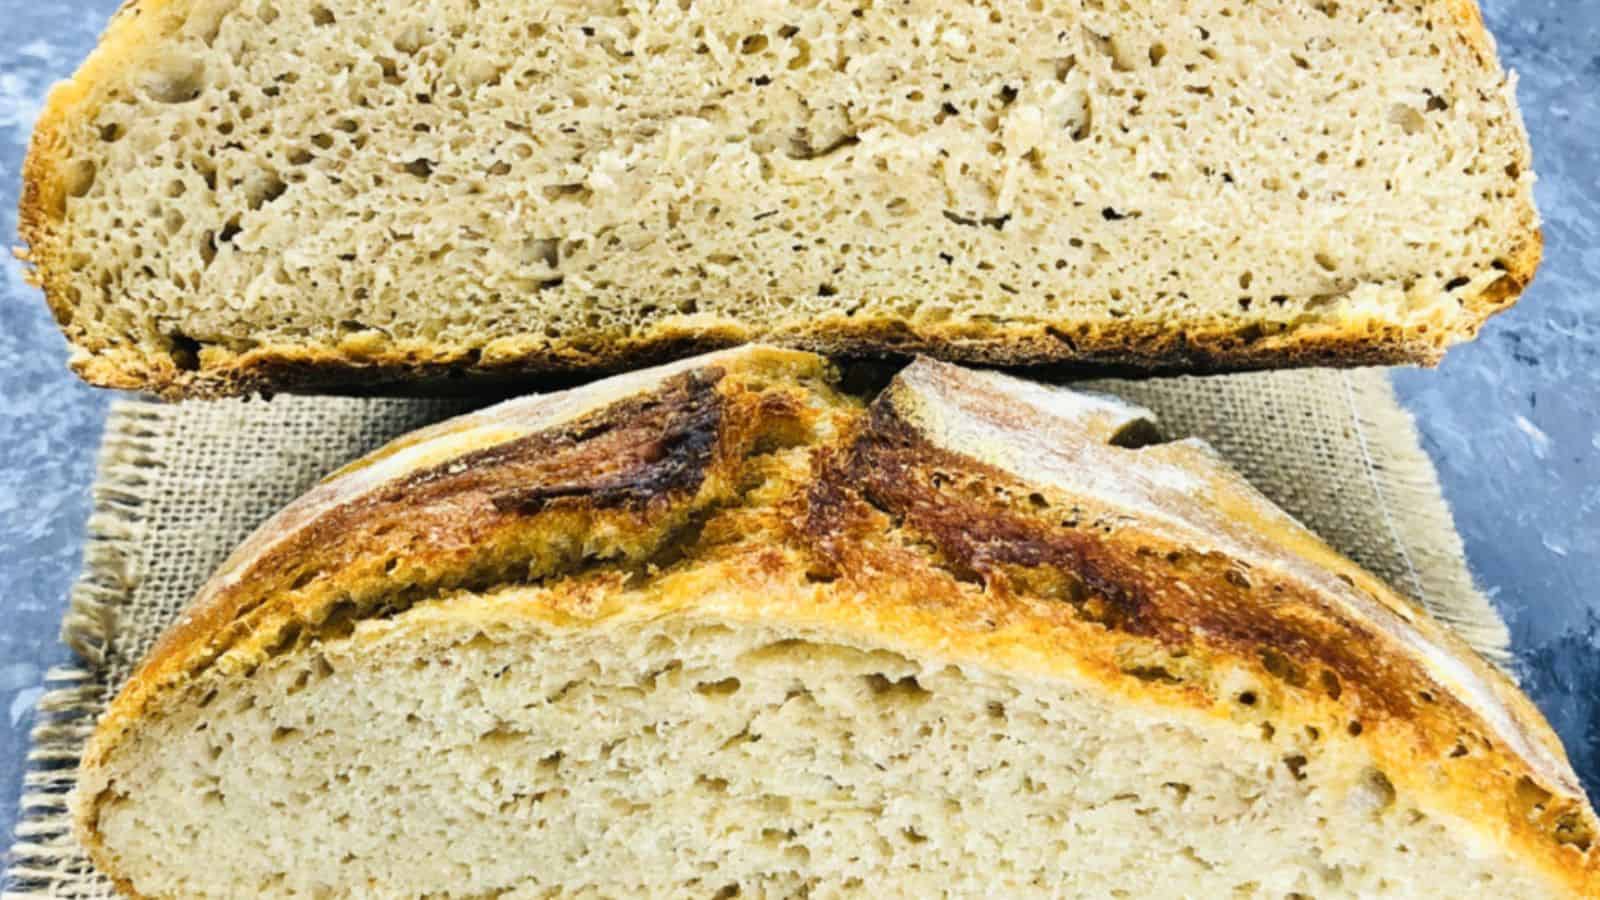 A close-up of a loaf of bread cut in half, displaying the crumb texture and crust details with one half resting above the other.